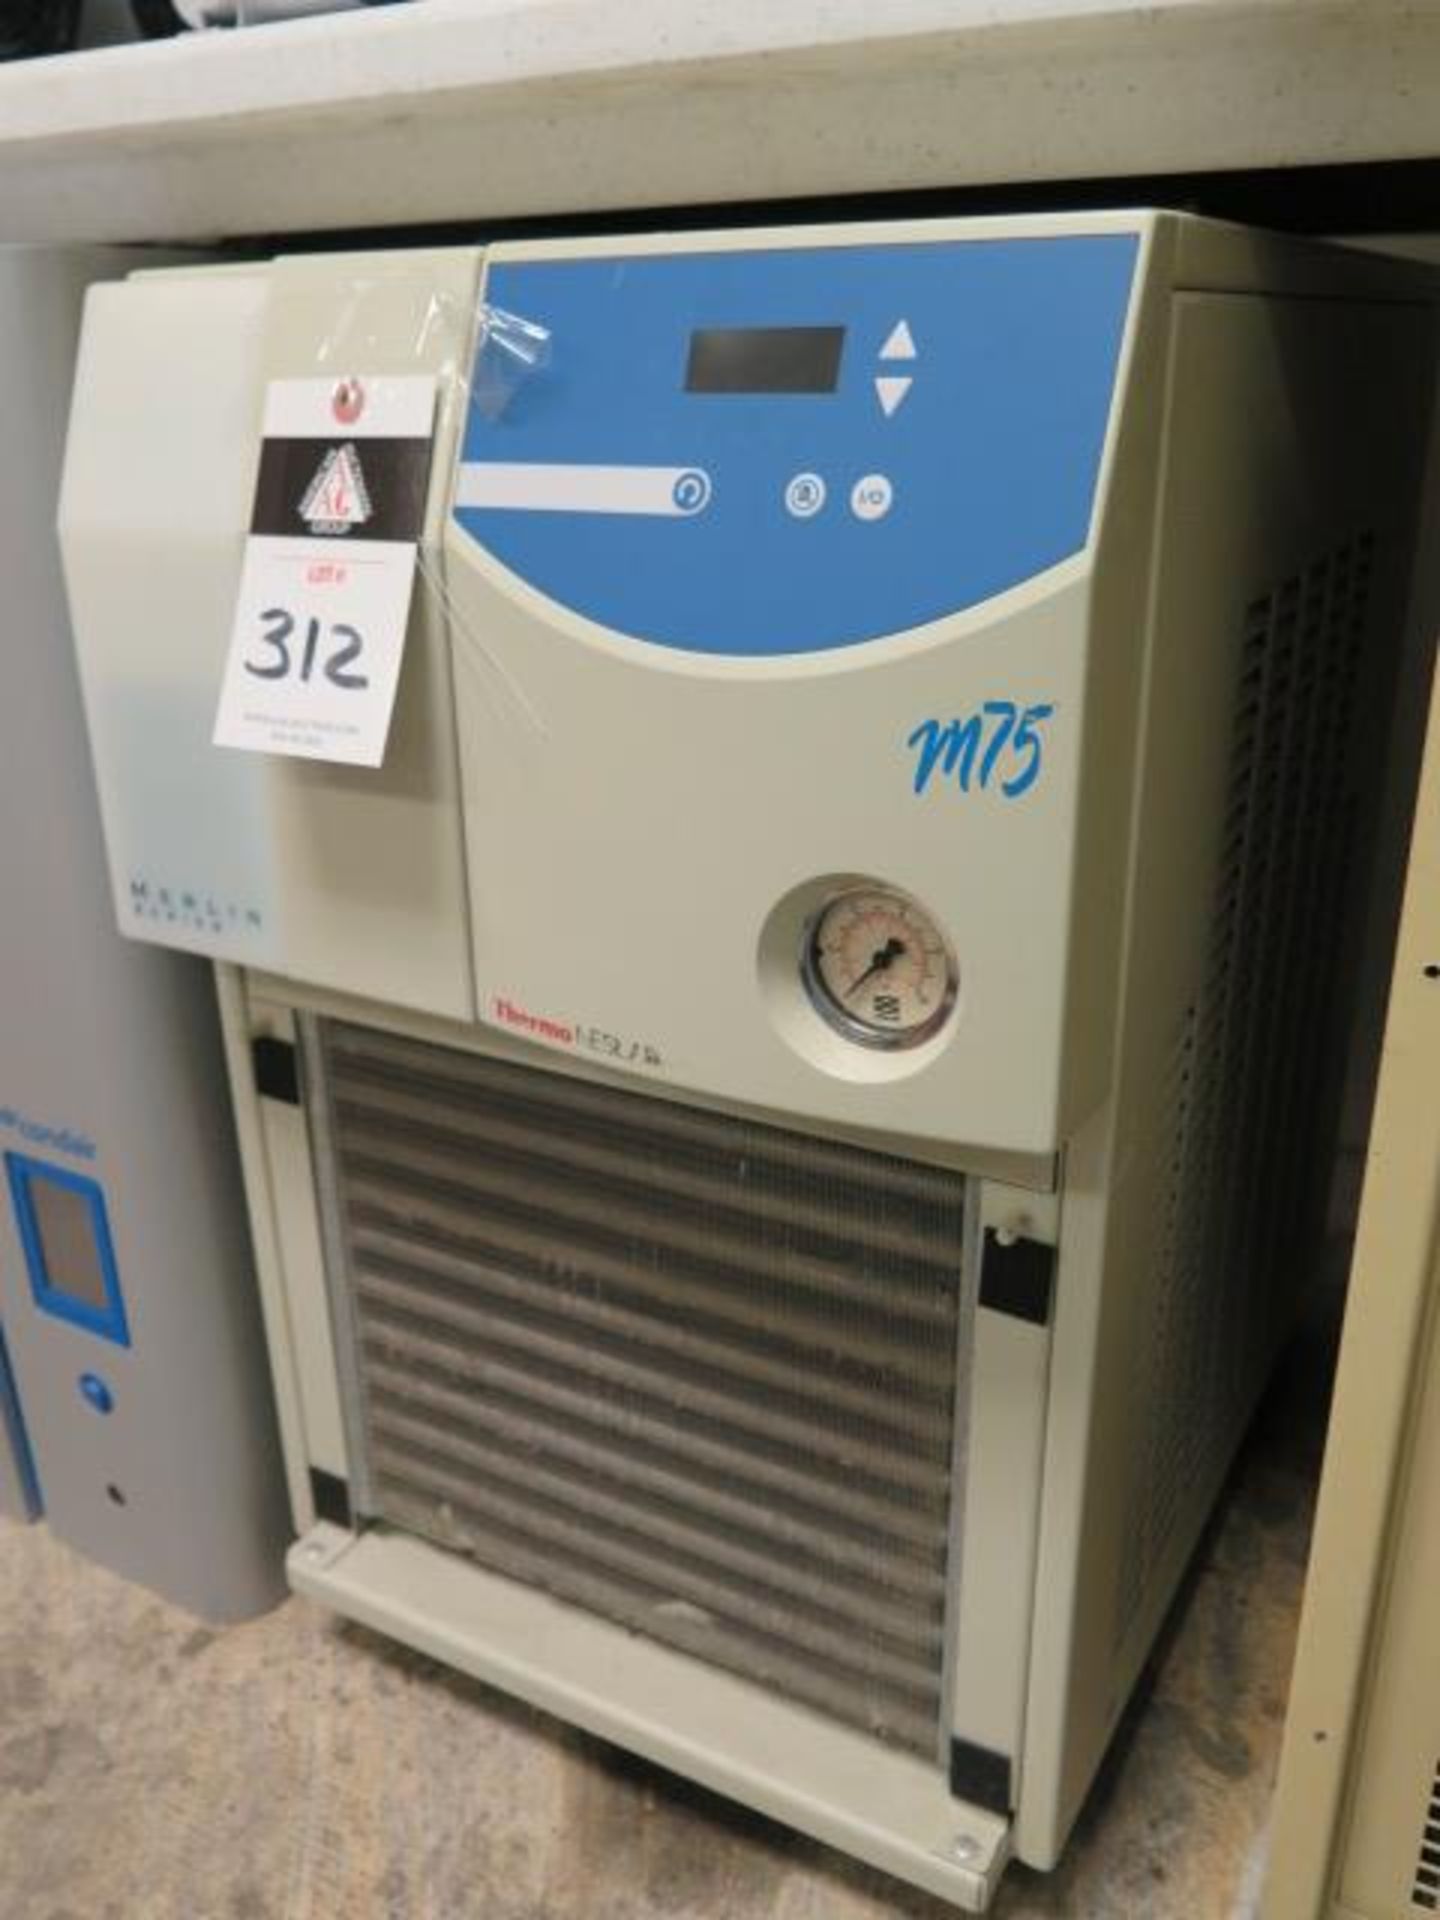 Thermo Neslab Merlin Series M75 Chiller Unit (SOLD AS-IS - NO WARRANTY) - Image 2 of 6